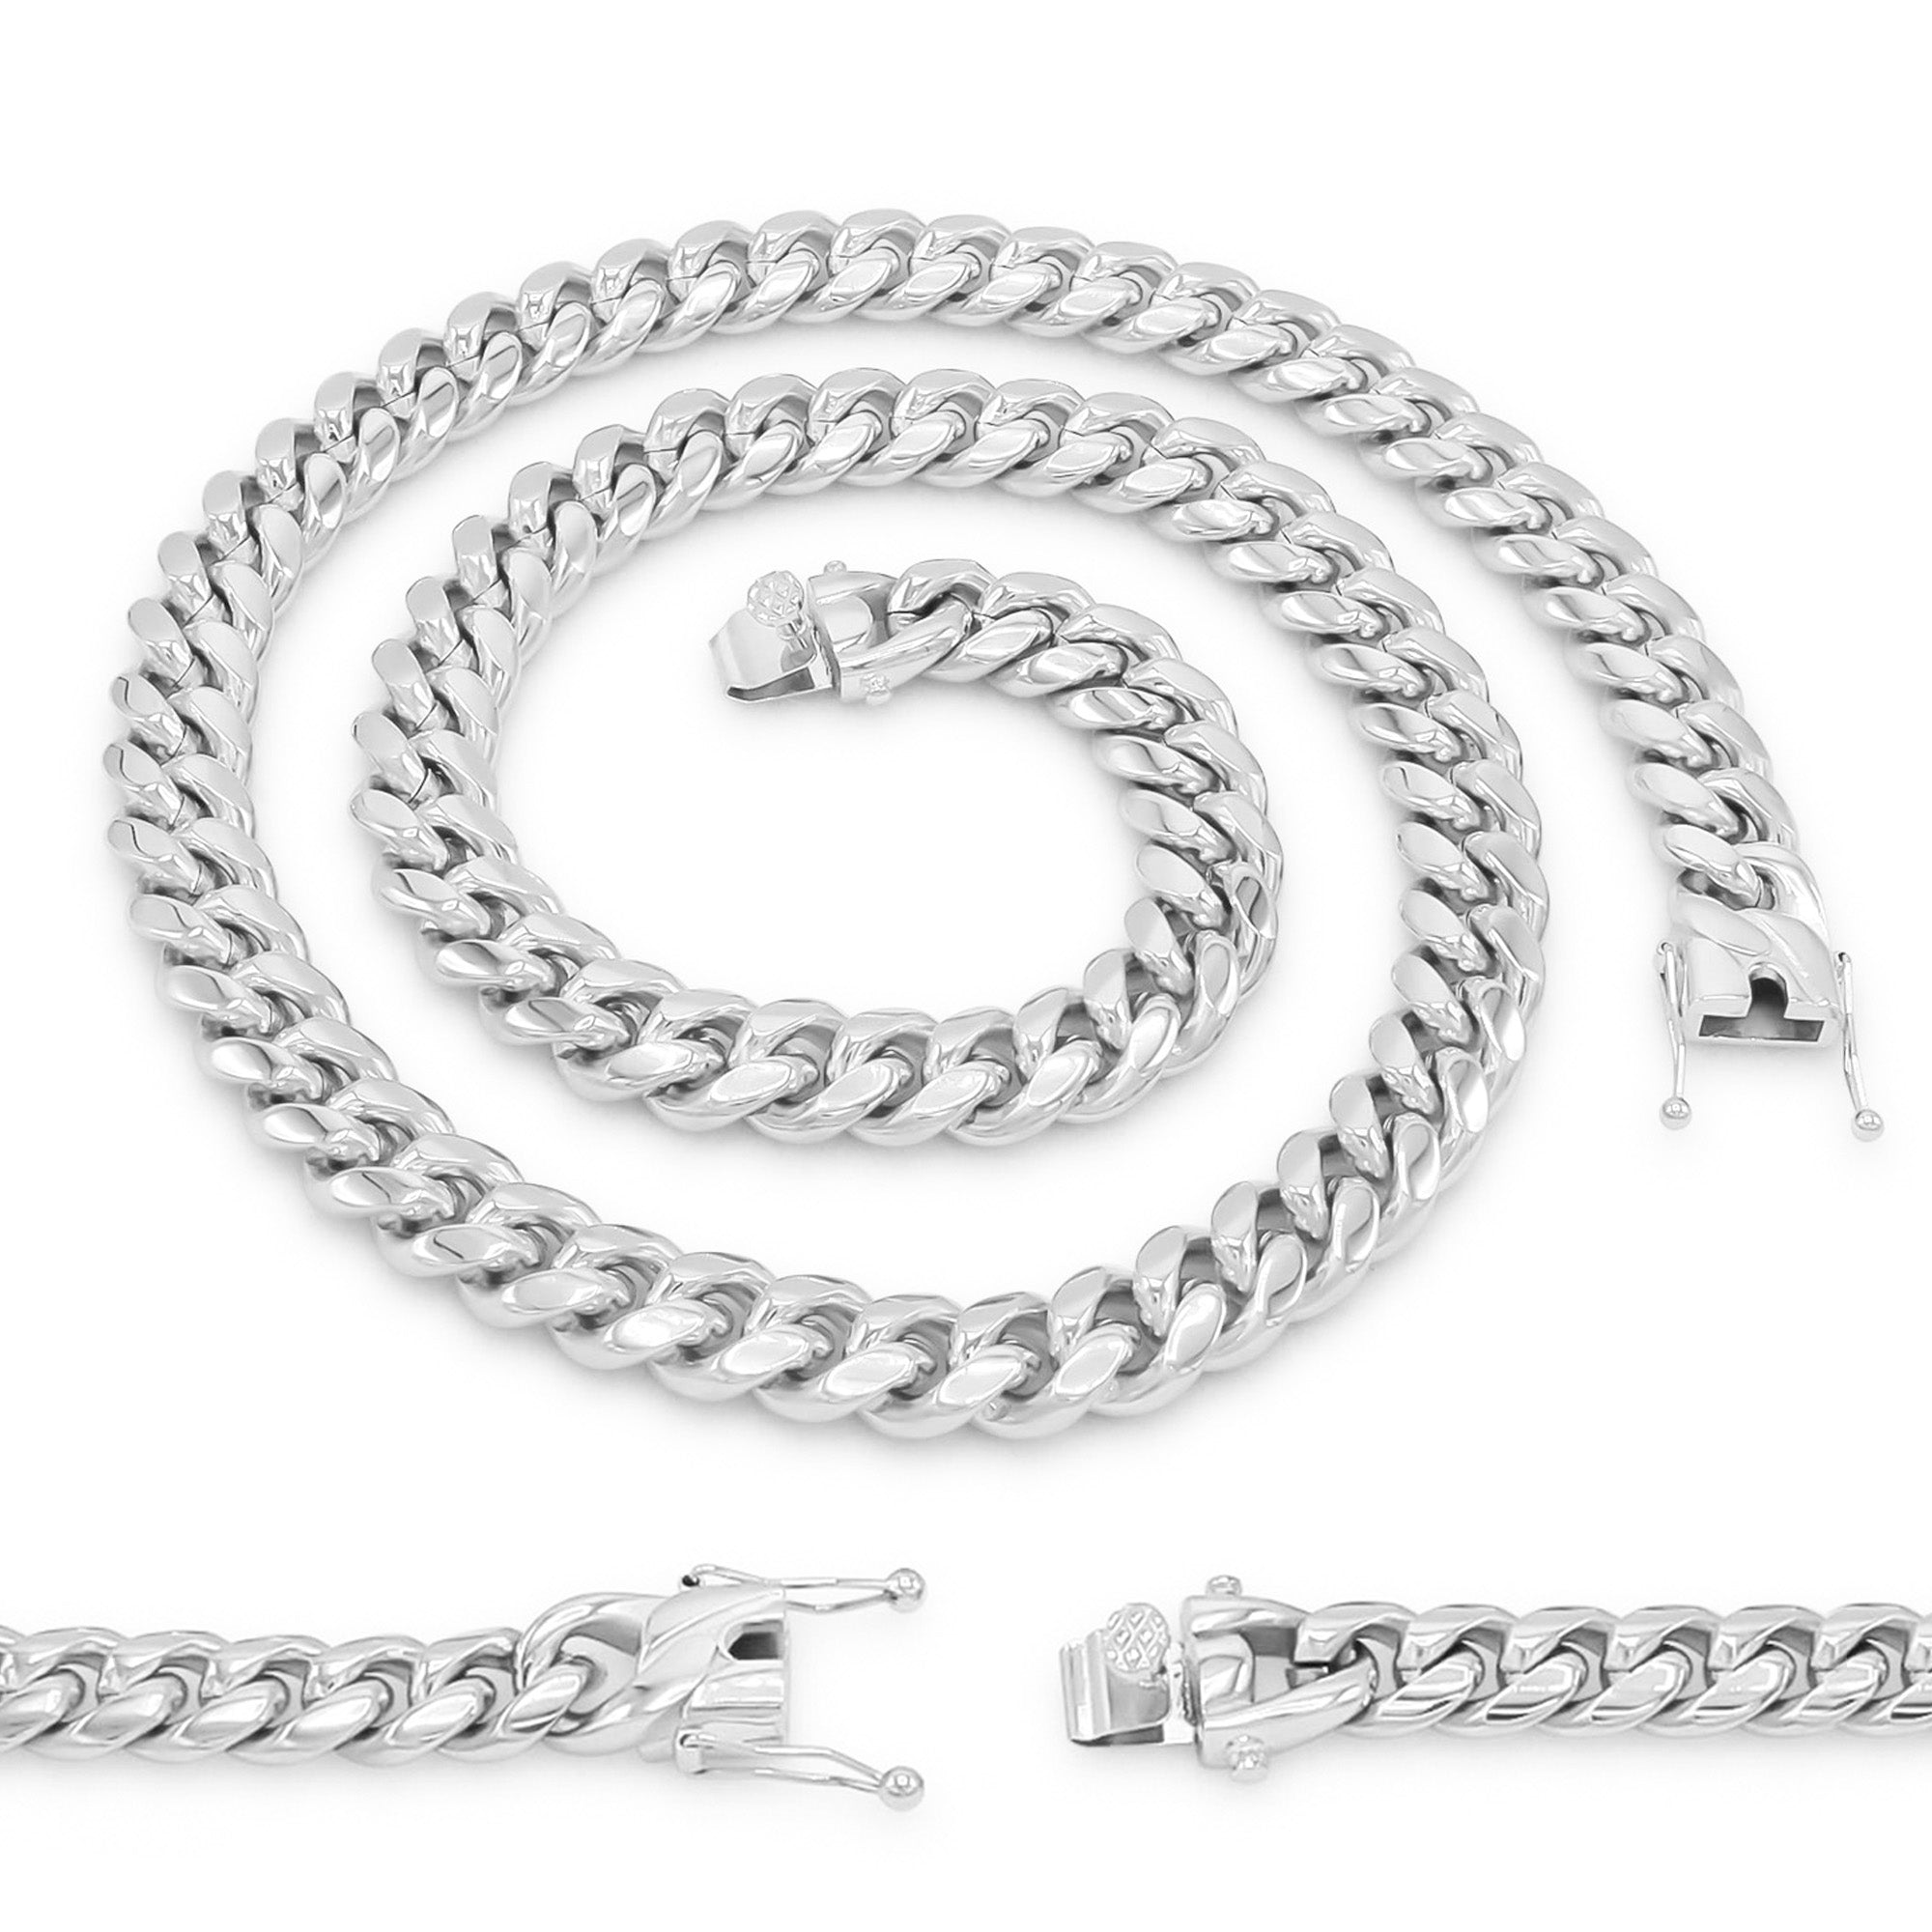 Stylish Stainless Steel Link Chain Mens Silver Chain Necklace For Men  Affordable And Unique Design From Jiabuydhiu, $47.93